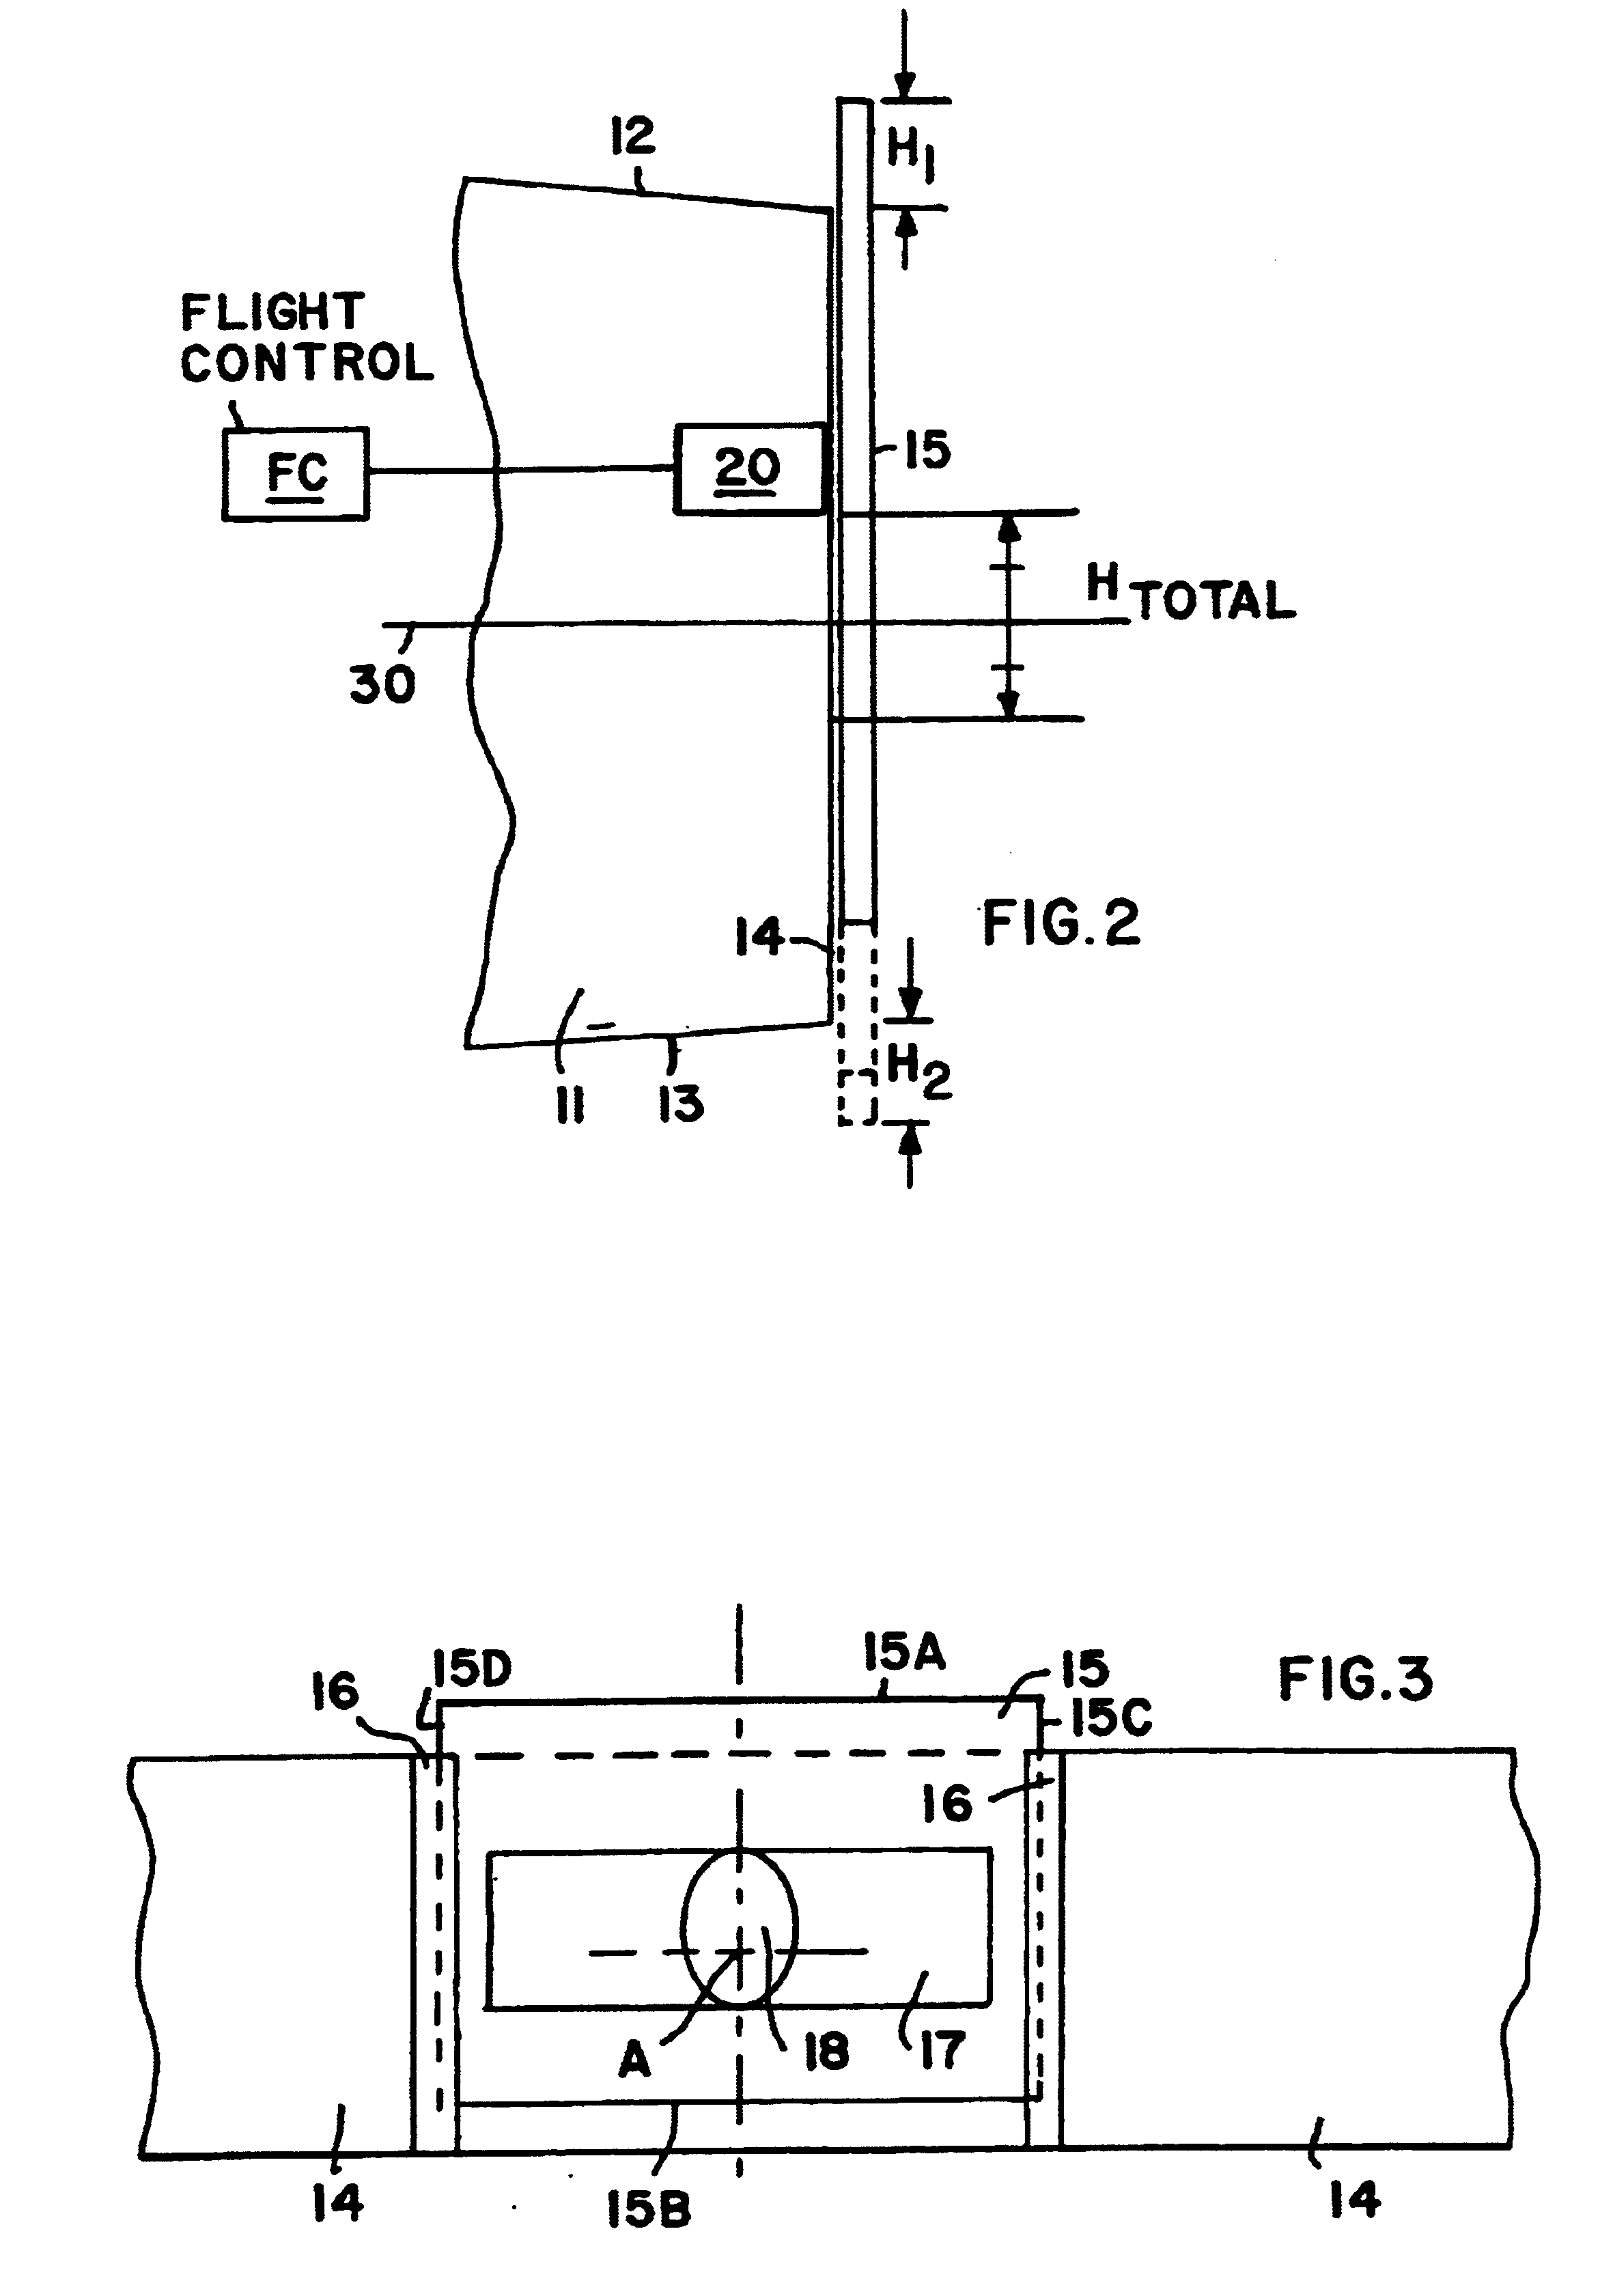 Flap arrangement for varying the aerodynamic lift generated by an aerodynamic element of an aircraft